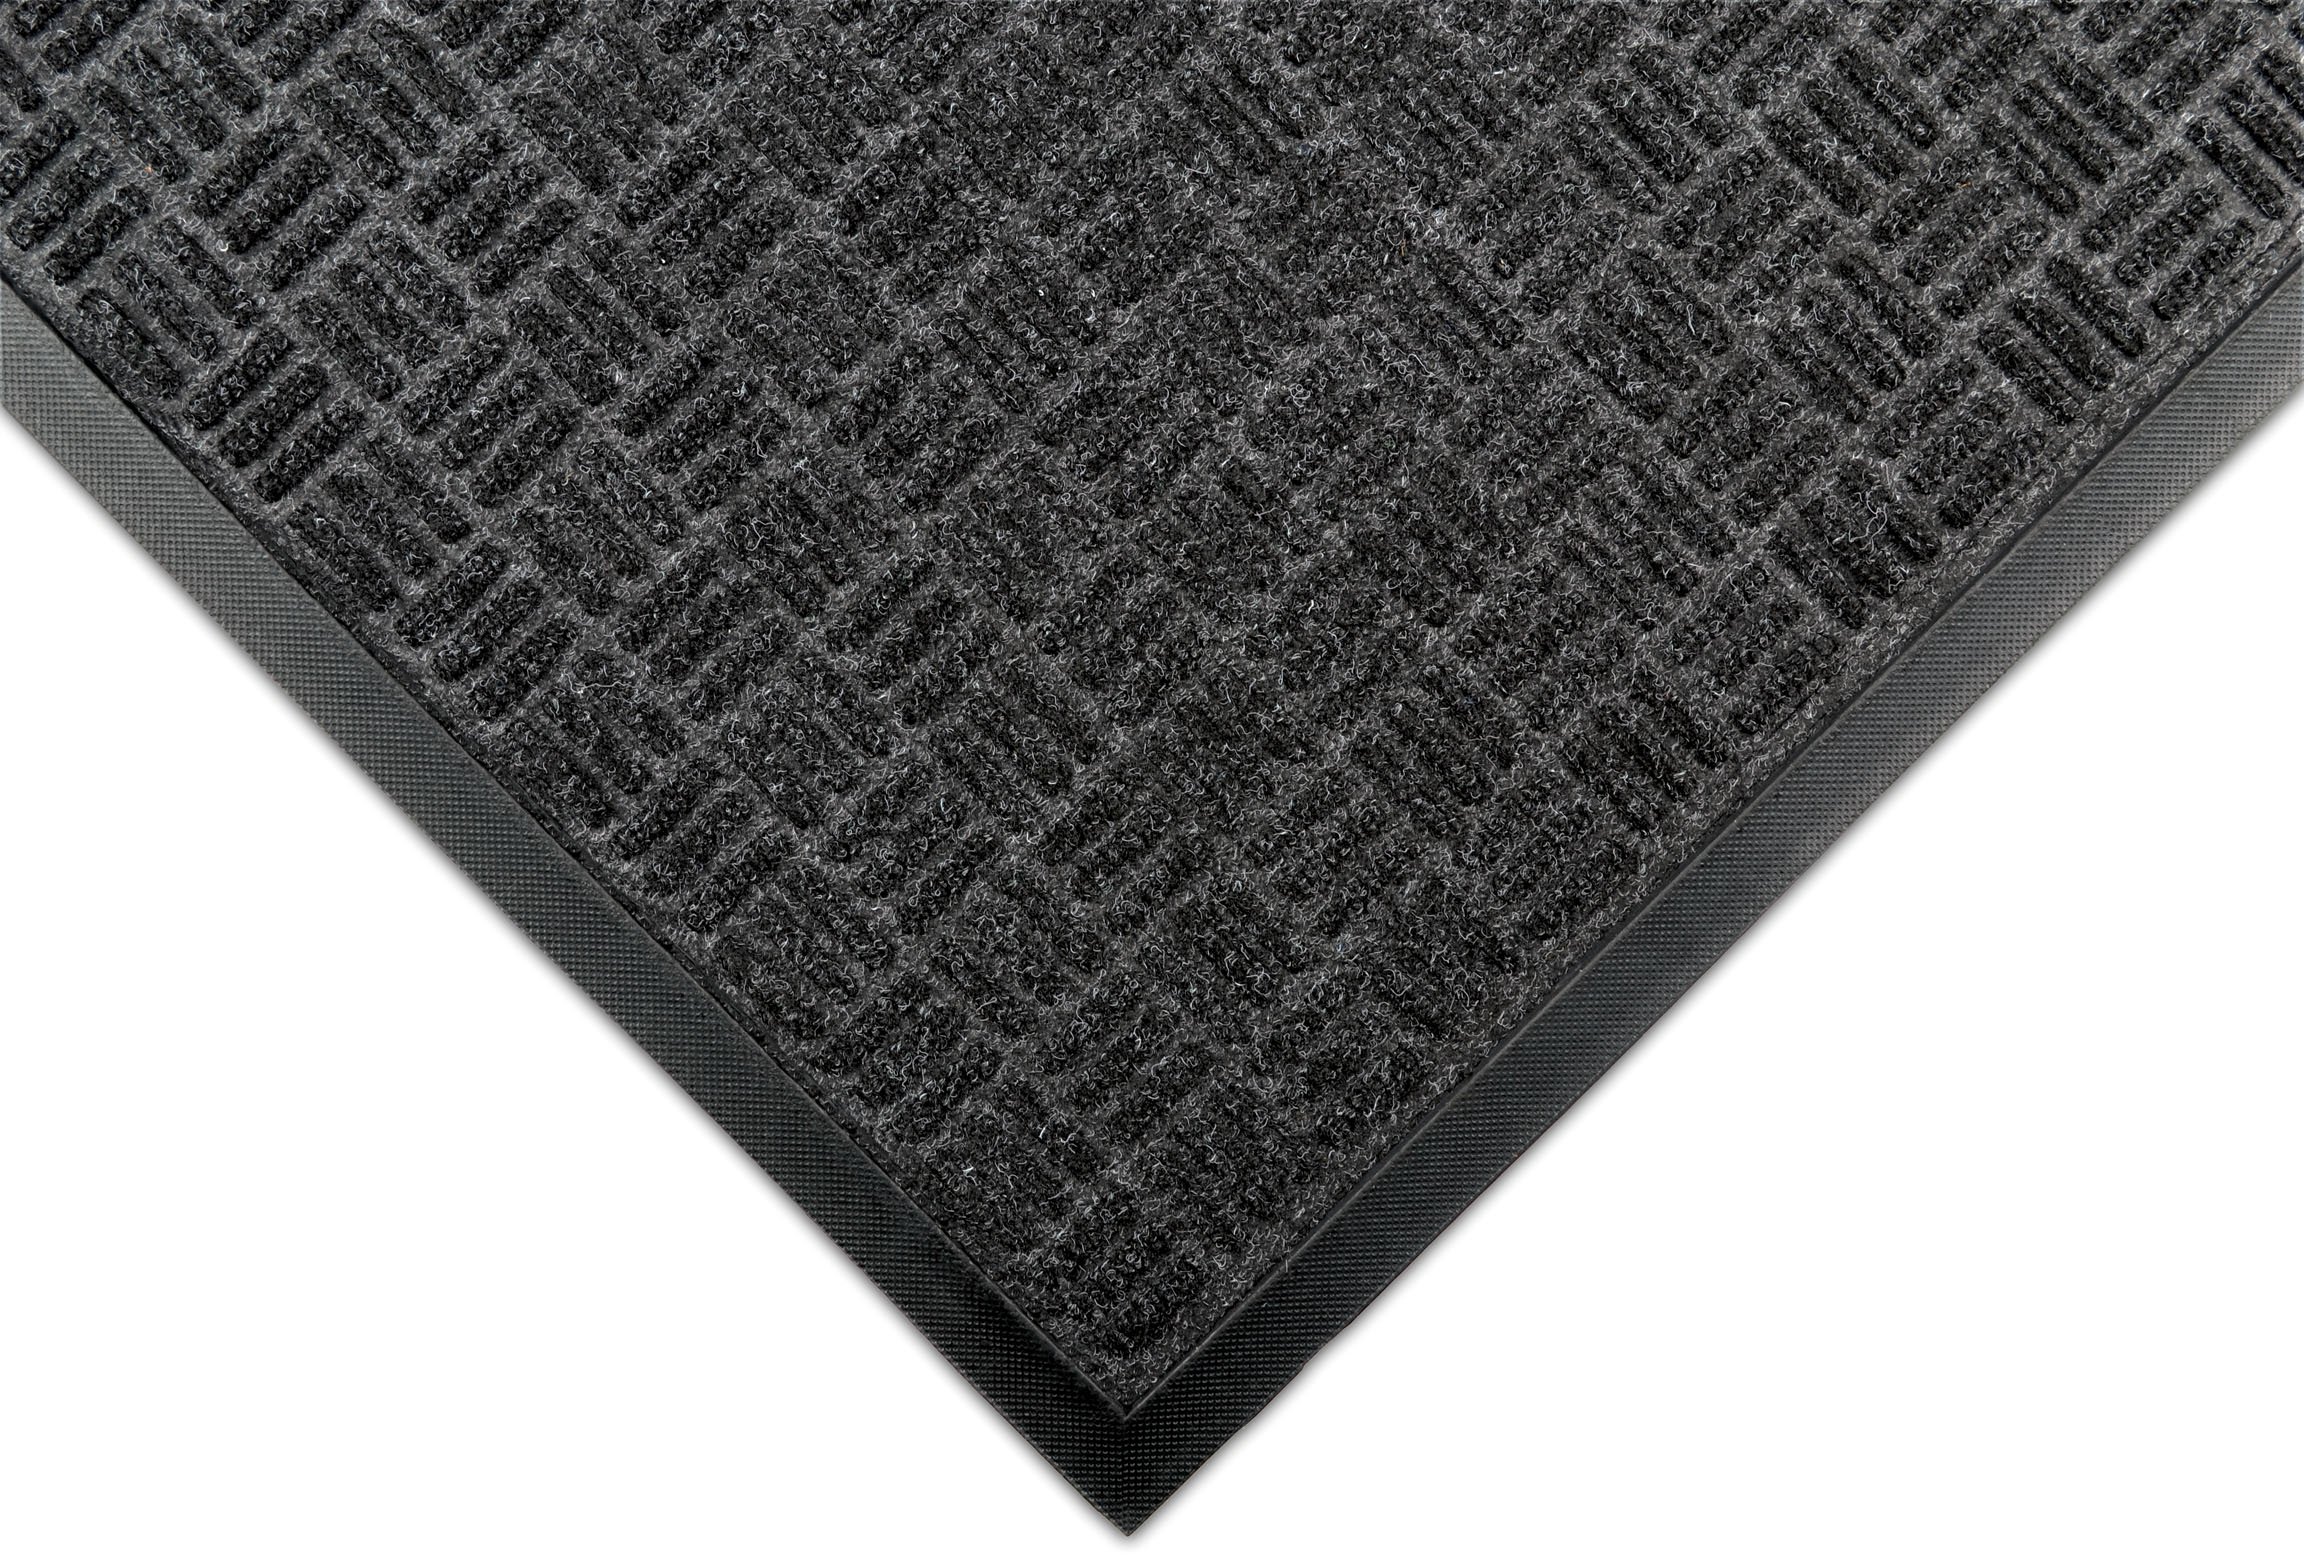 Notrax 167 Portraita Rubber-Backed Entrance Mat, For Home Or Office 3 X 4 Charcoal